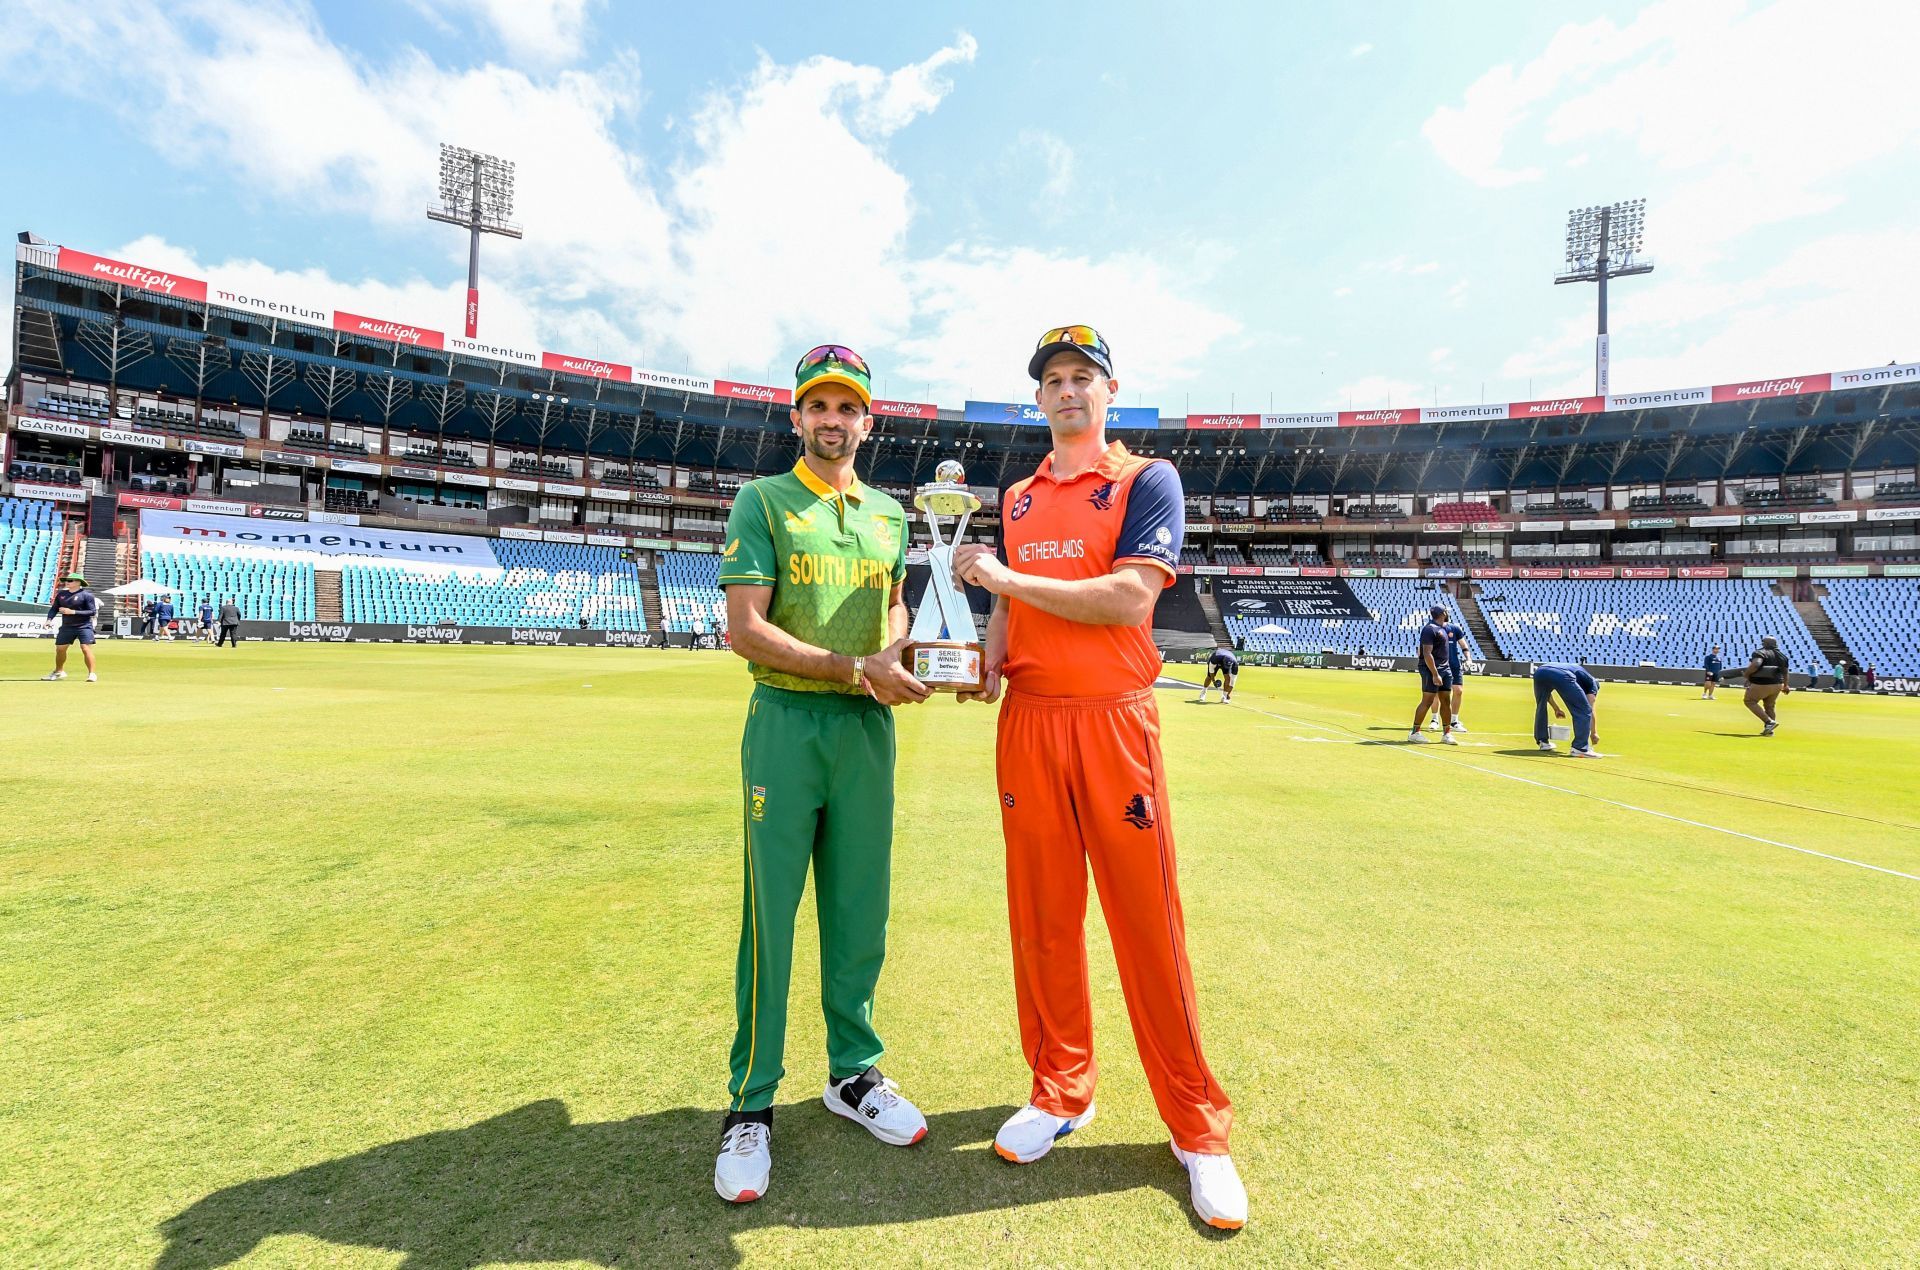 South Africa and the Netherlands played the first match of their ICC Cricket World Cup Super League series earlier today